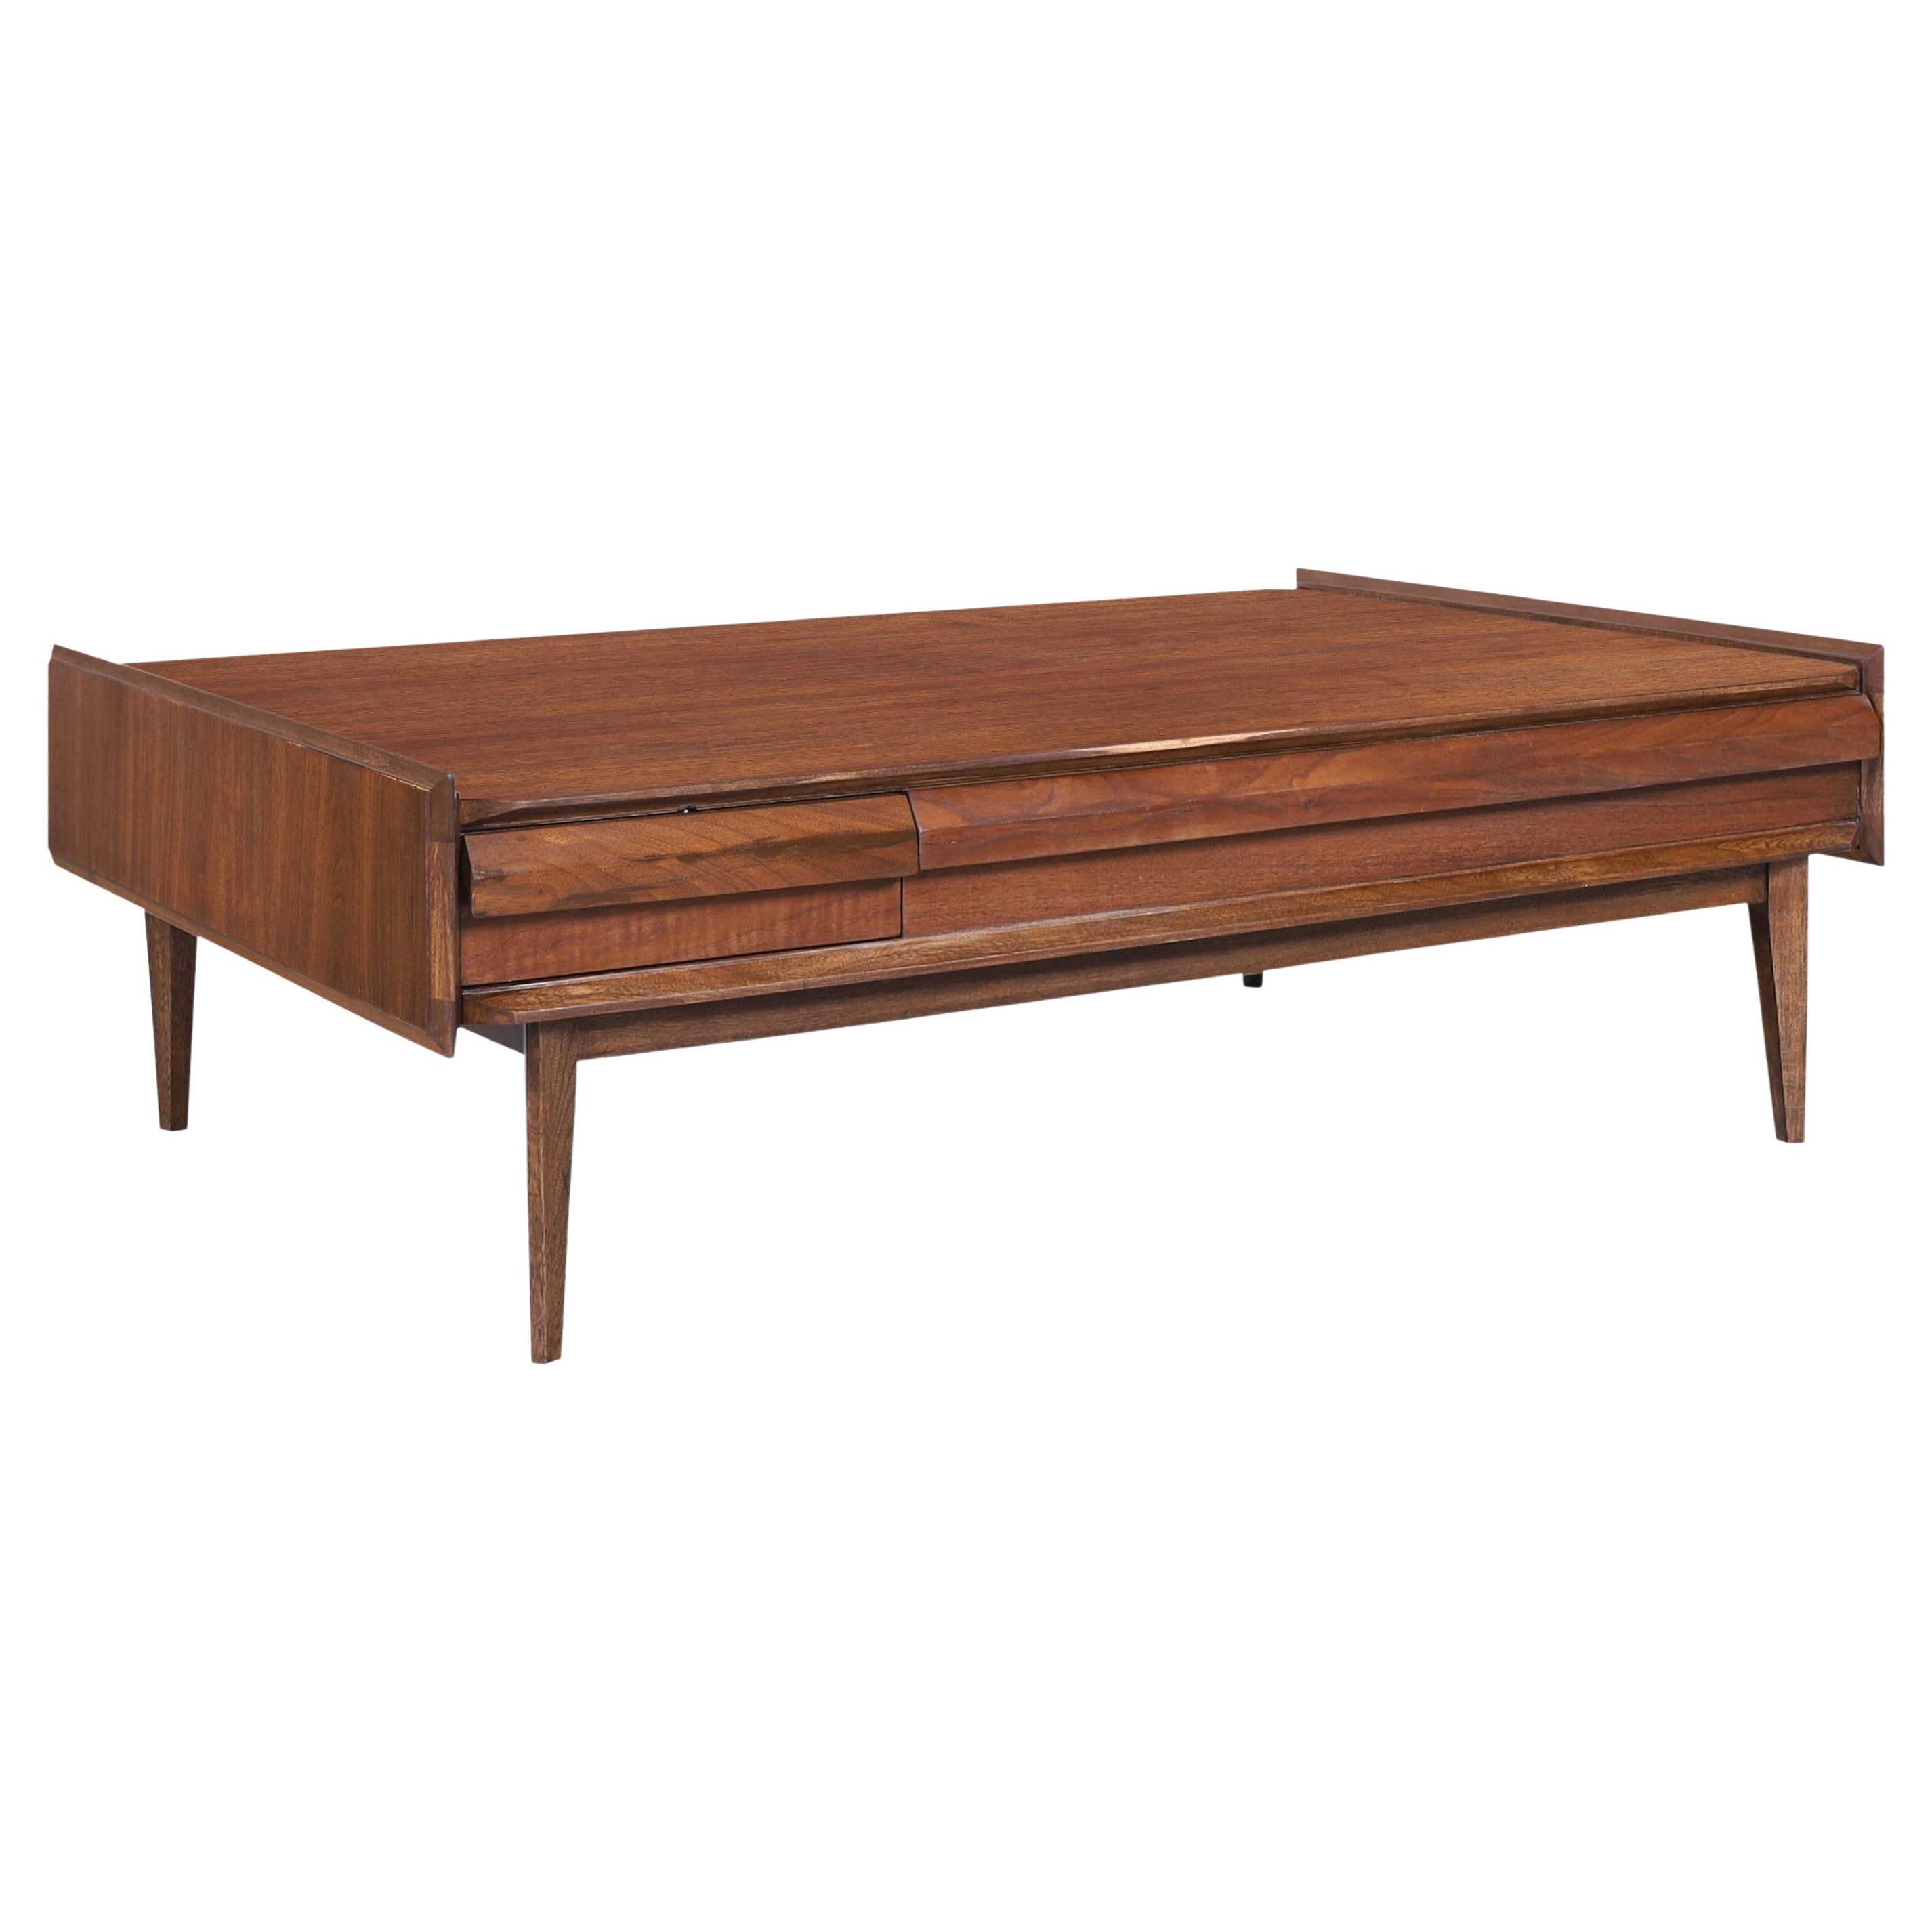 Mid-Century Modern "First Edition" Walnut Coffee Table by Lane